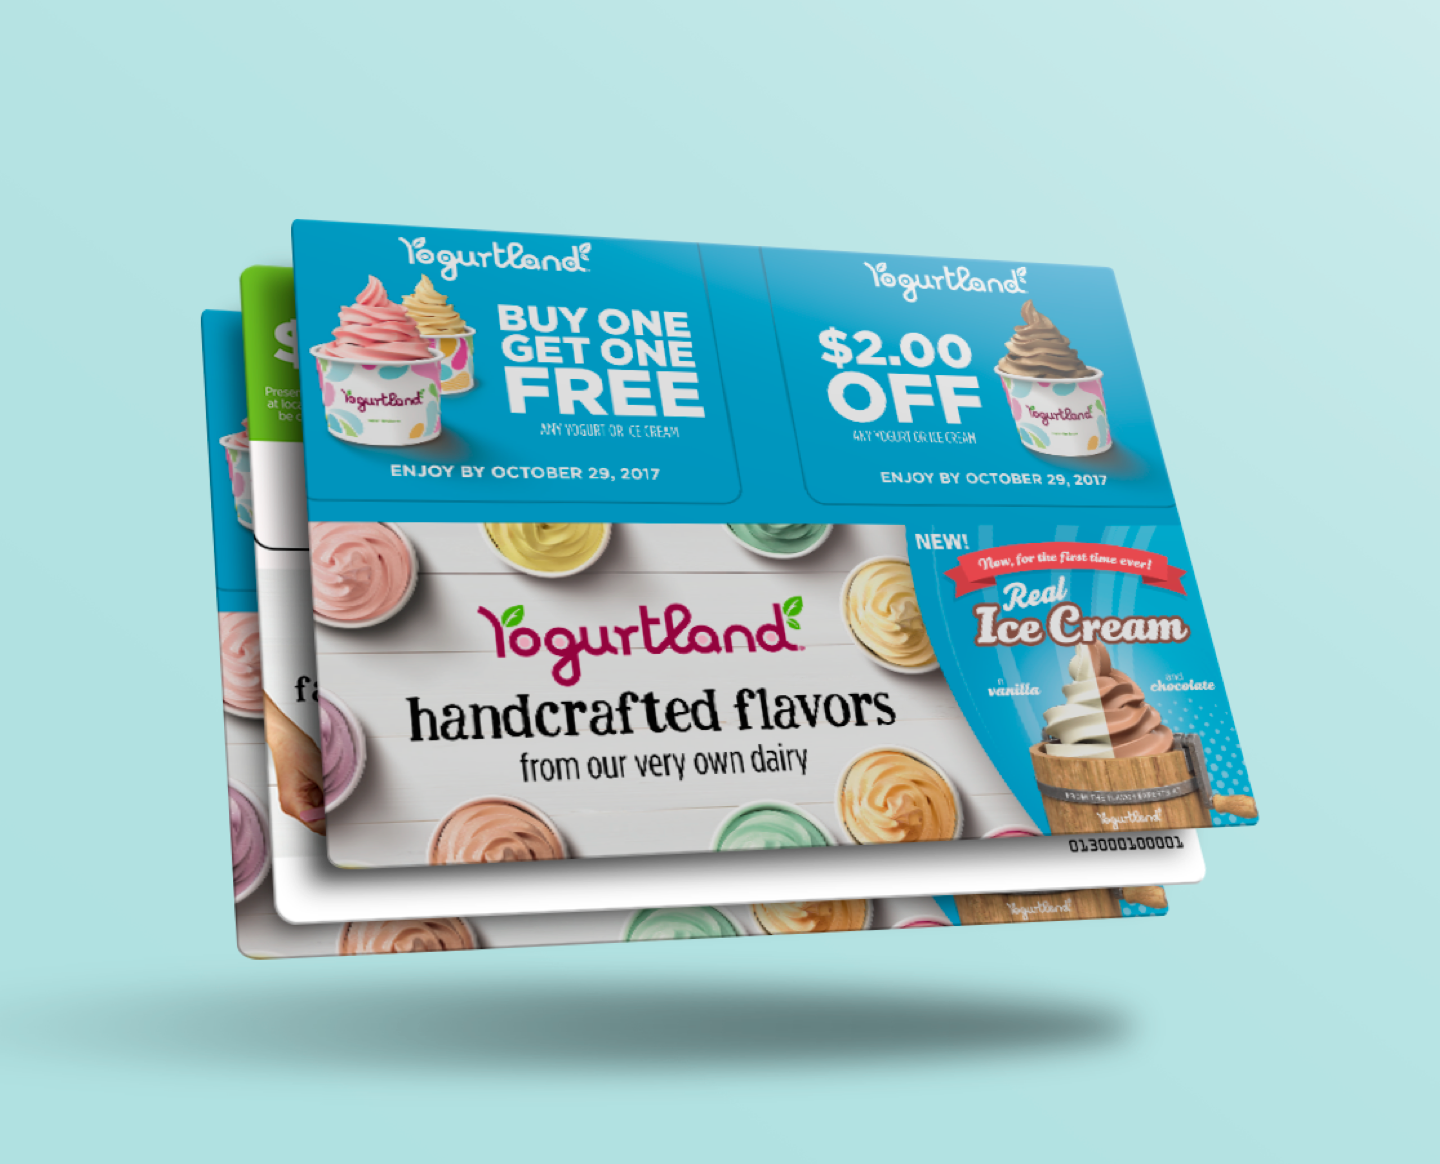 Image of coupons from Yogurtland advertising discounts when used